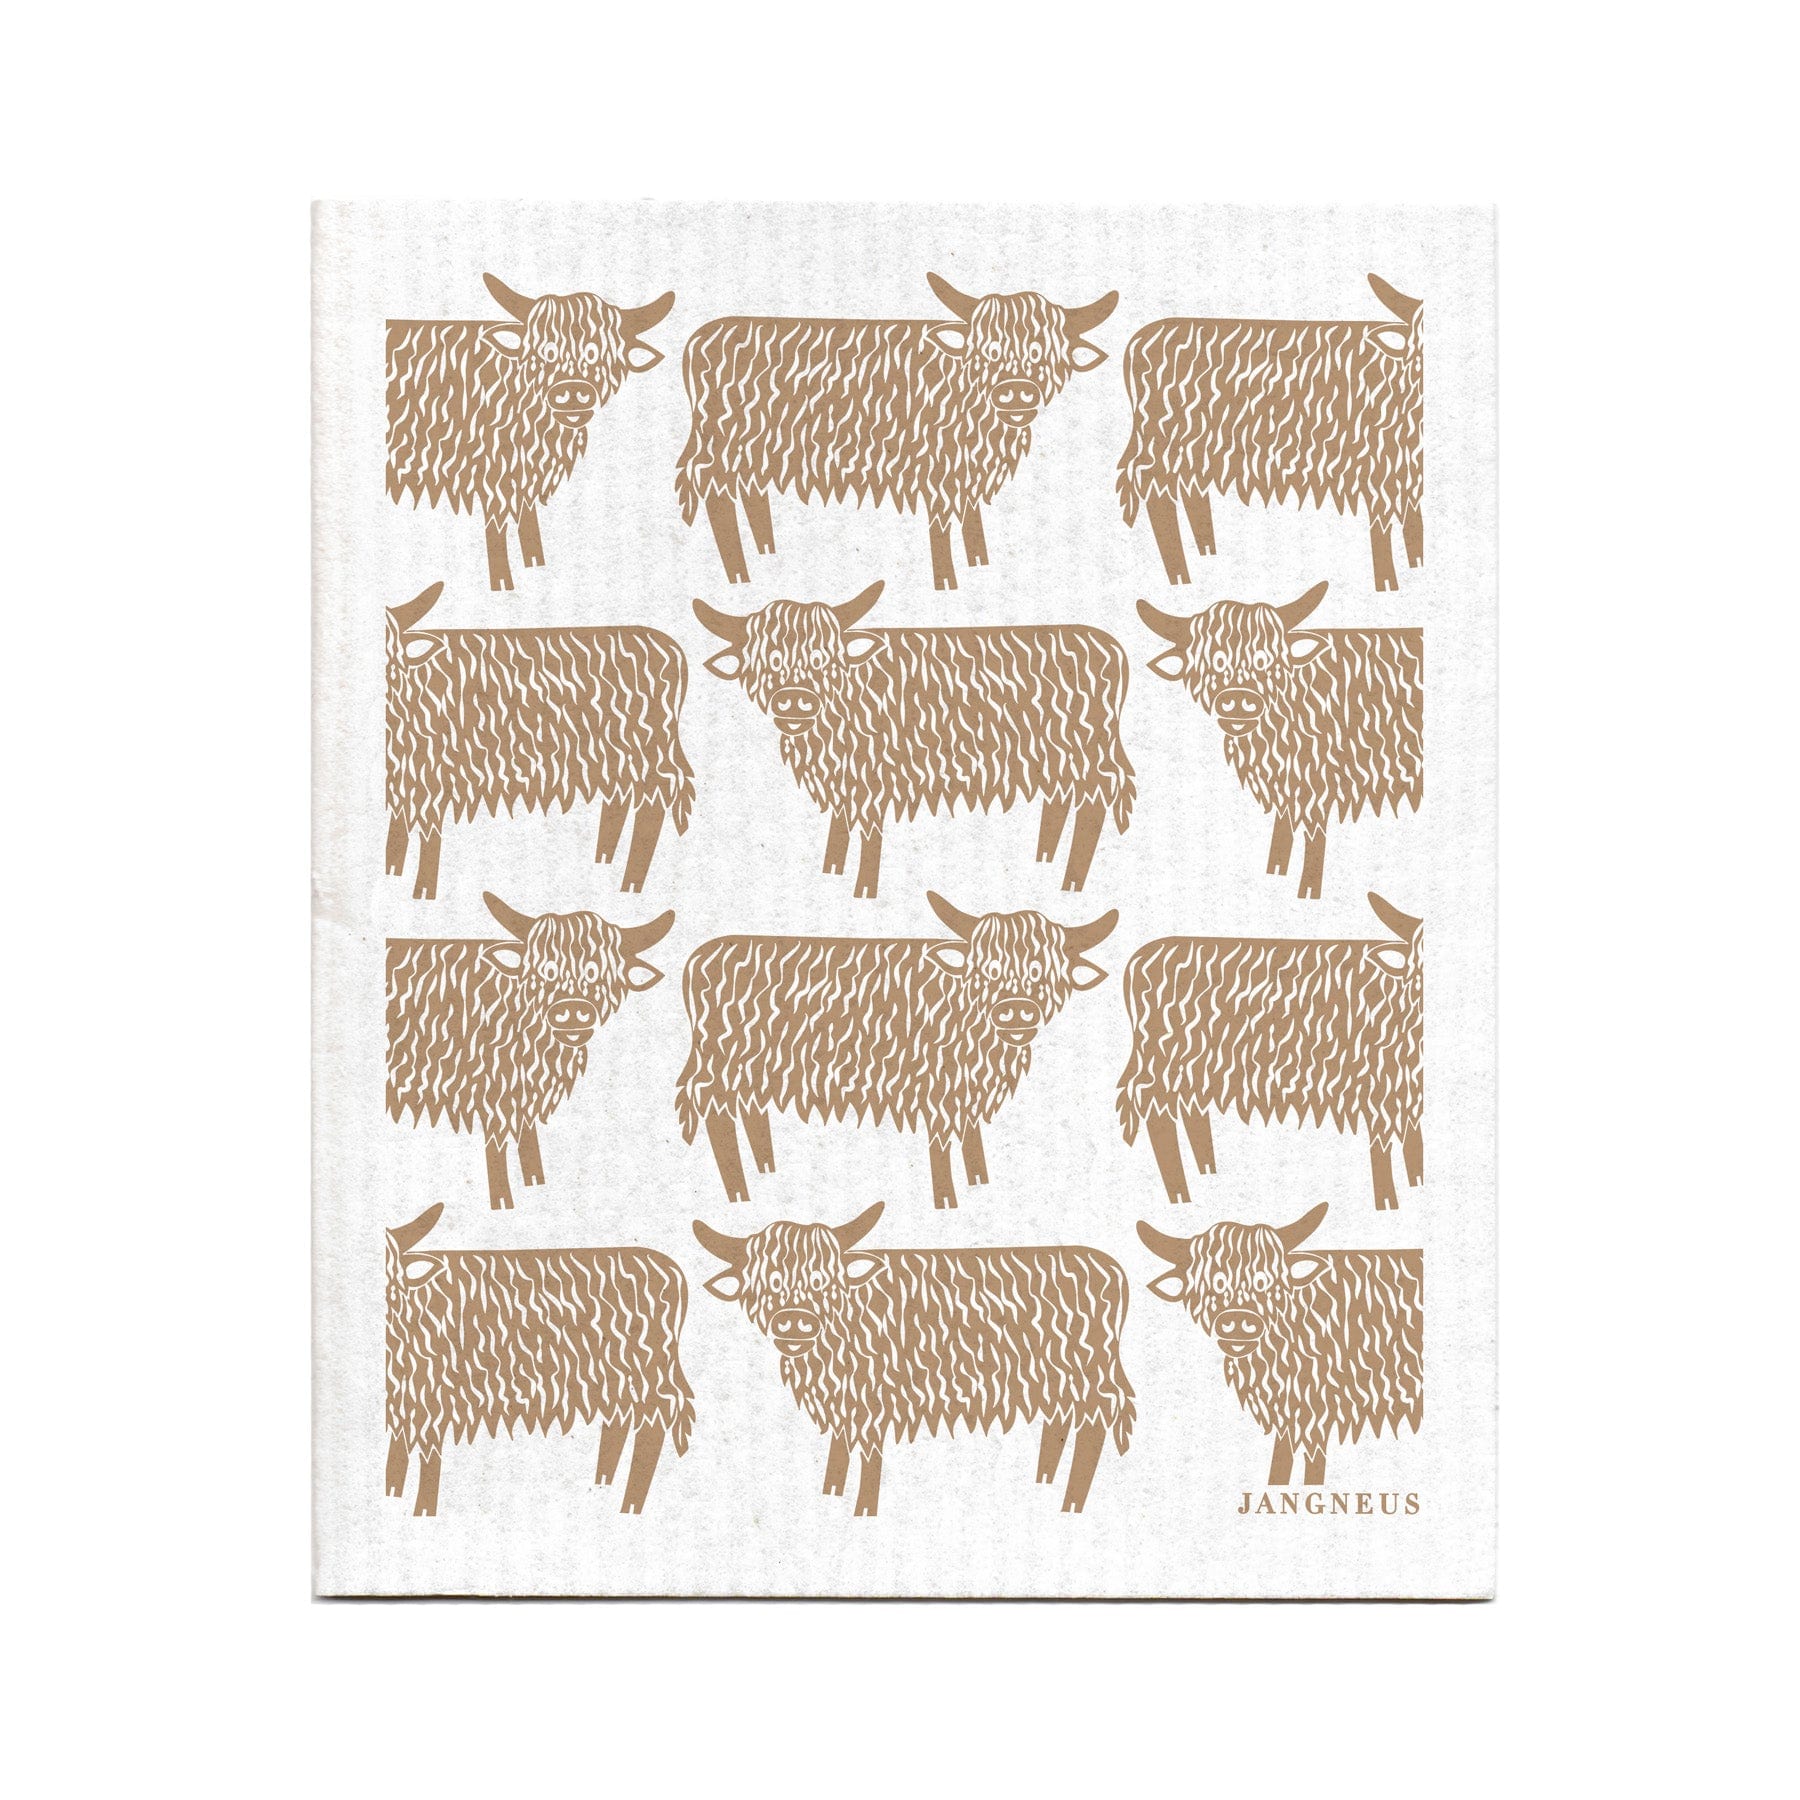 Alt text: Brown and cream illustrated dishcloth pattern featuring multiple stylized yaks, textured design, kitchen textile by JANGNEUS.